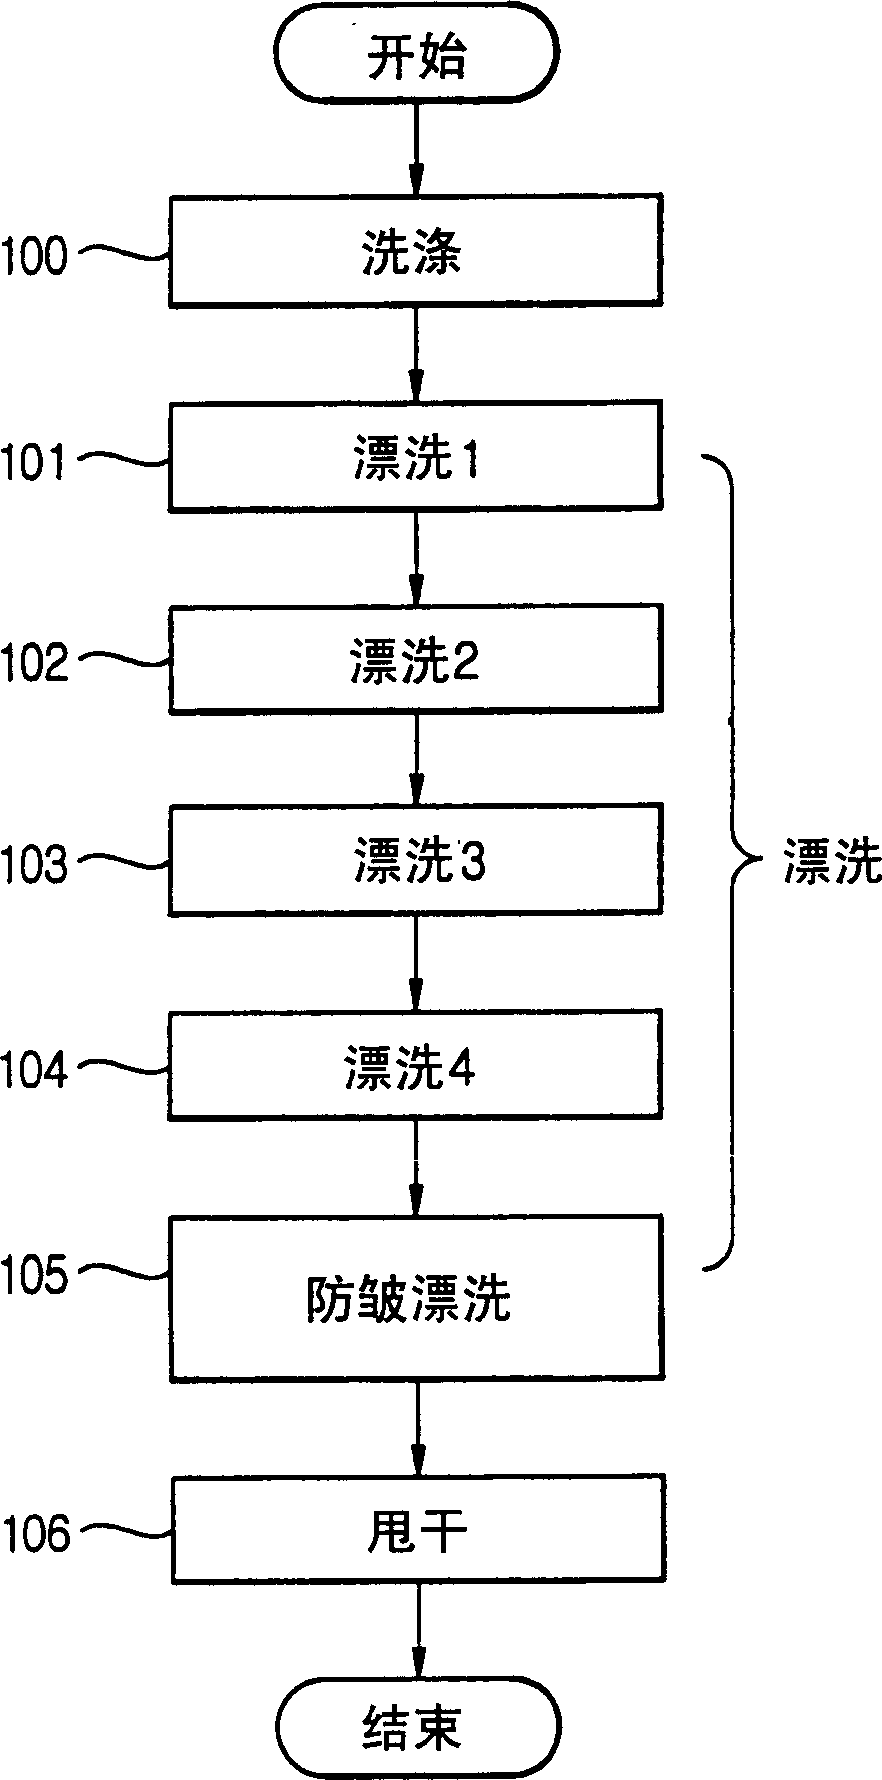 Controlling method for washing procedure of washer